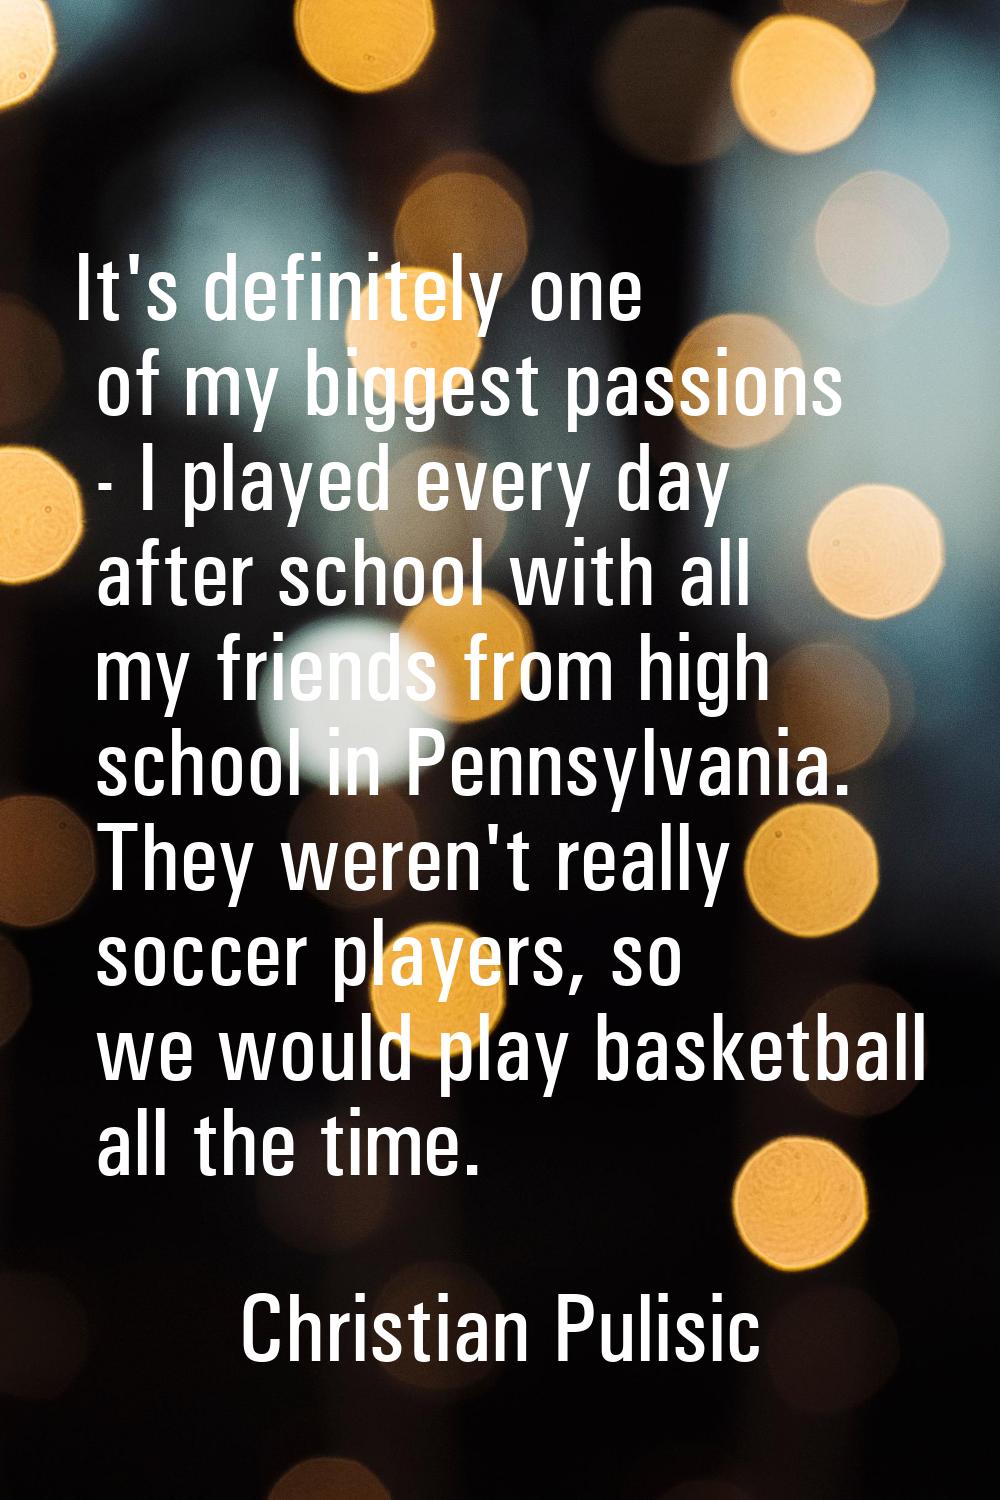 It's definitely one of my biggest passions - I played every day after school with all my friends fr